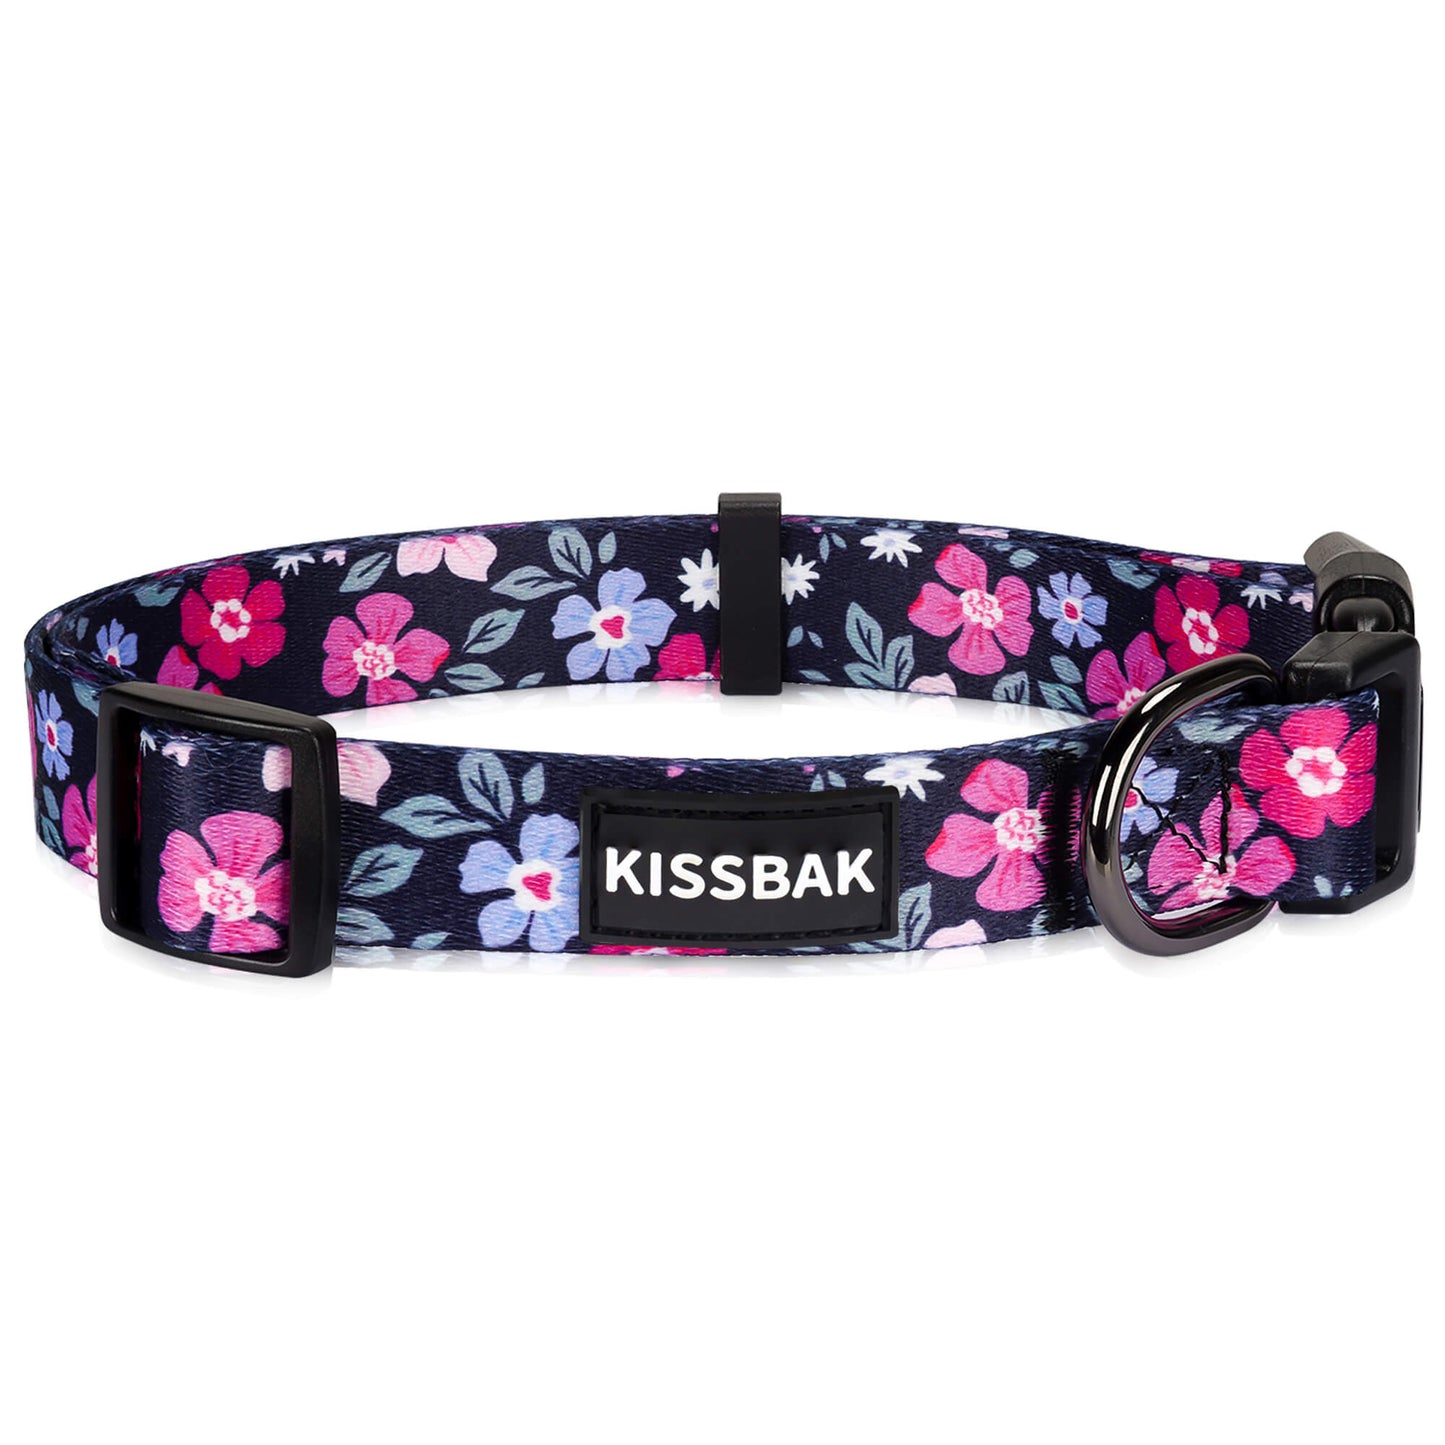 Dog Collar For Small Dogs - Special Design Puppy Collar Cute Small